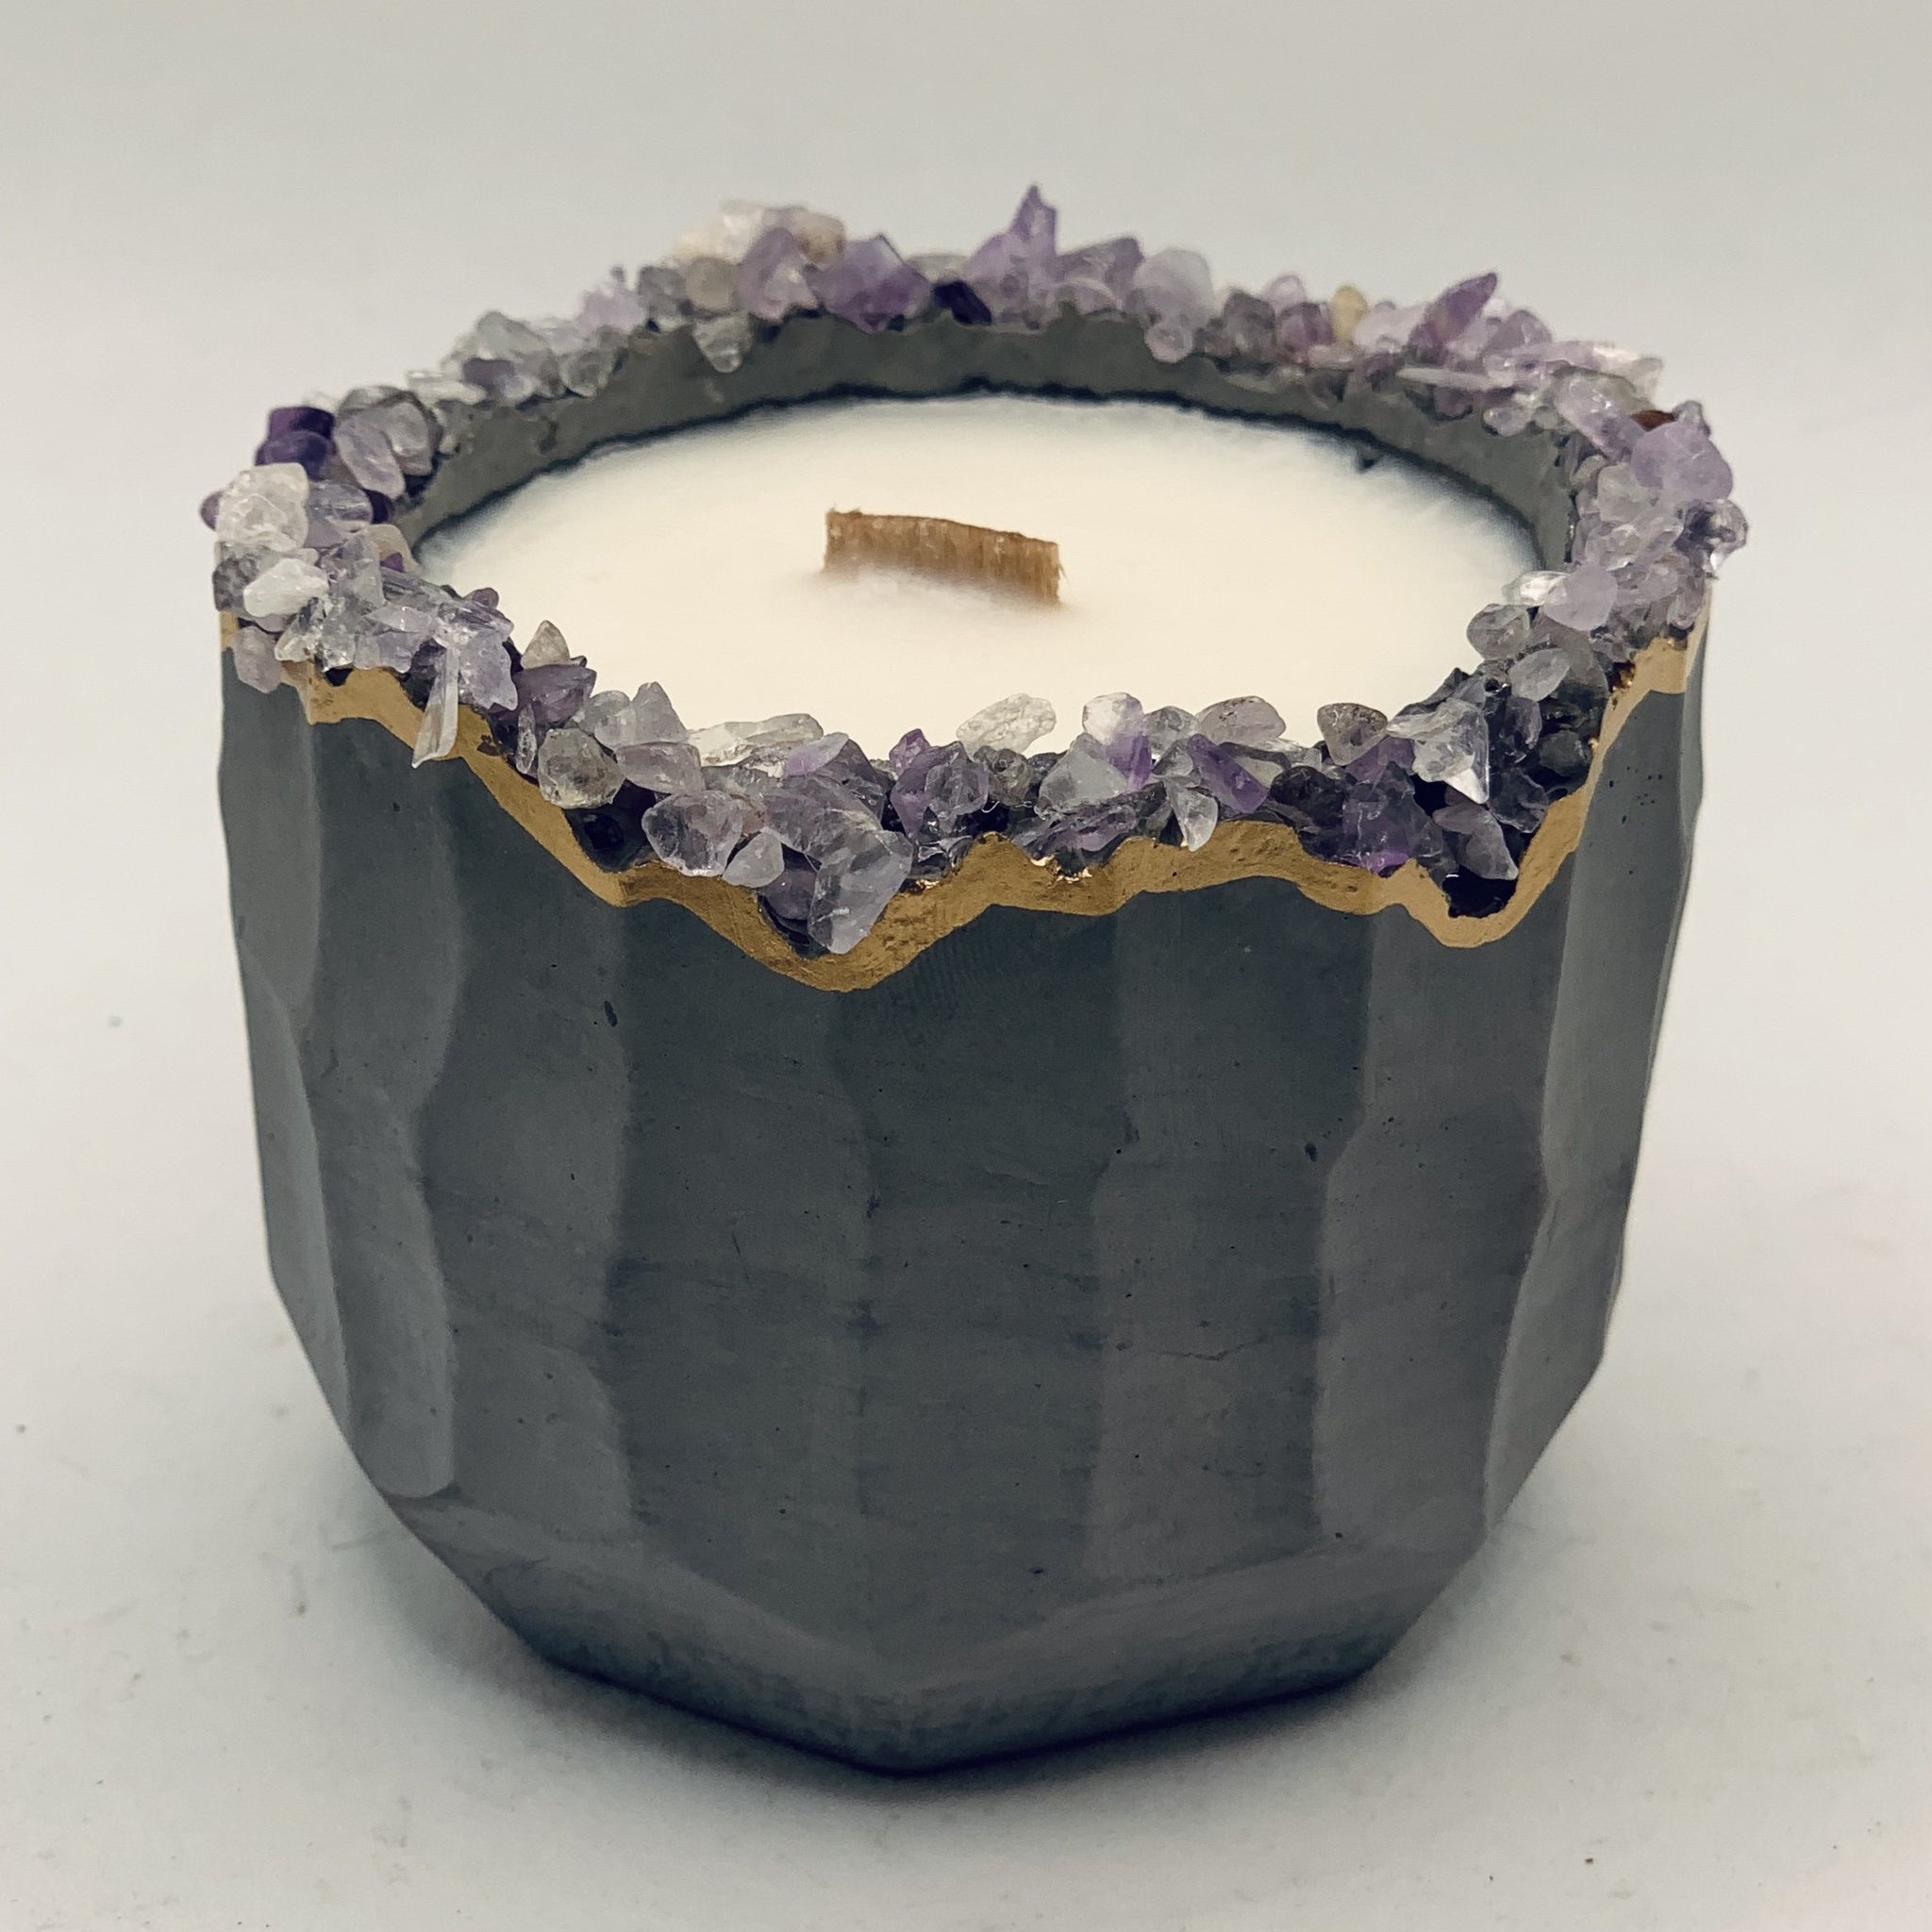 Concrete Soy Candle with Wood Wick - Amethyst Geode